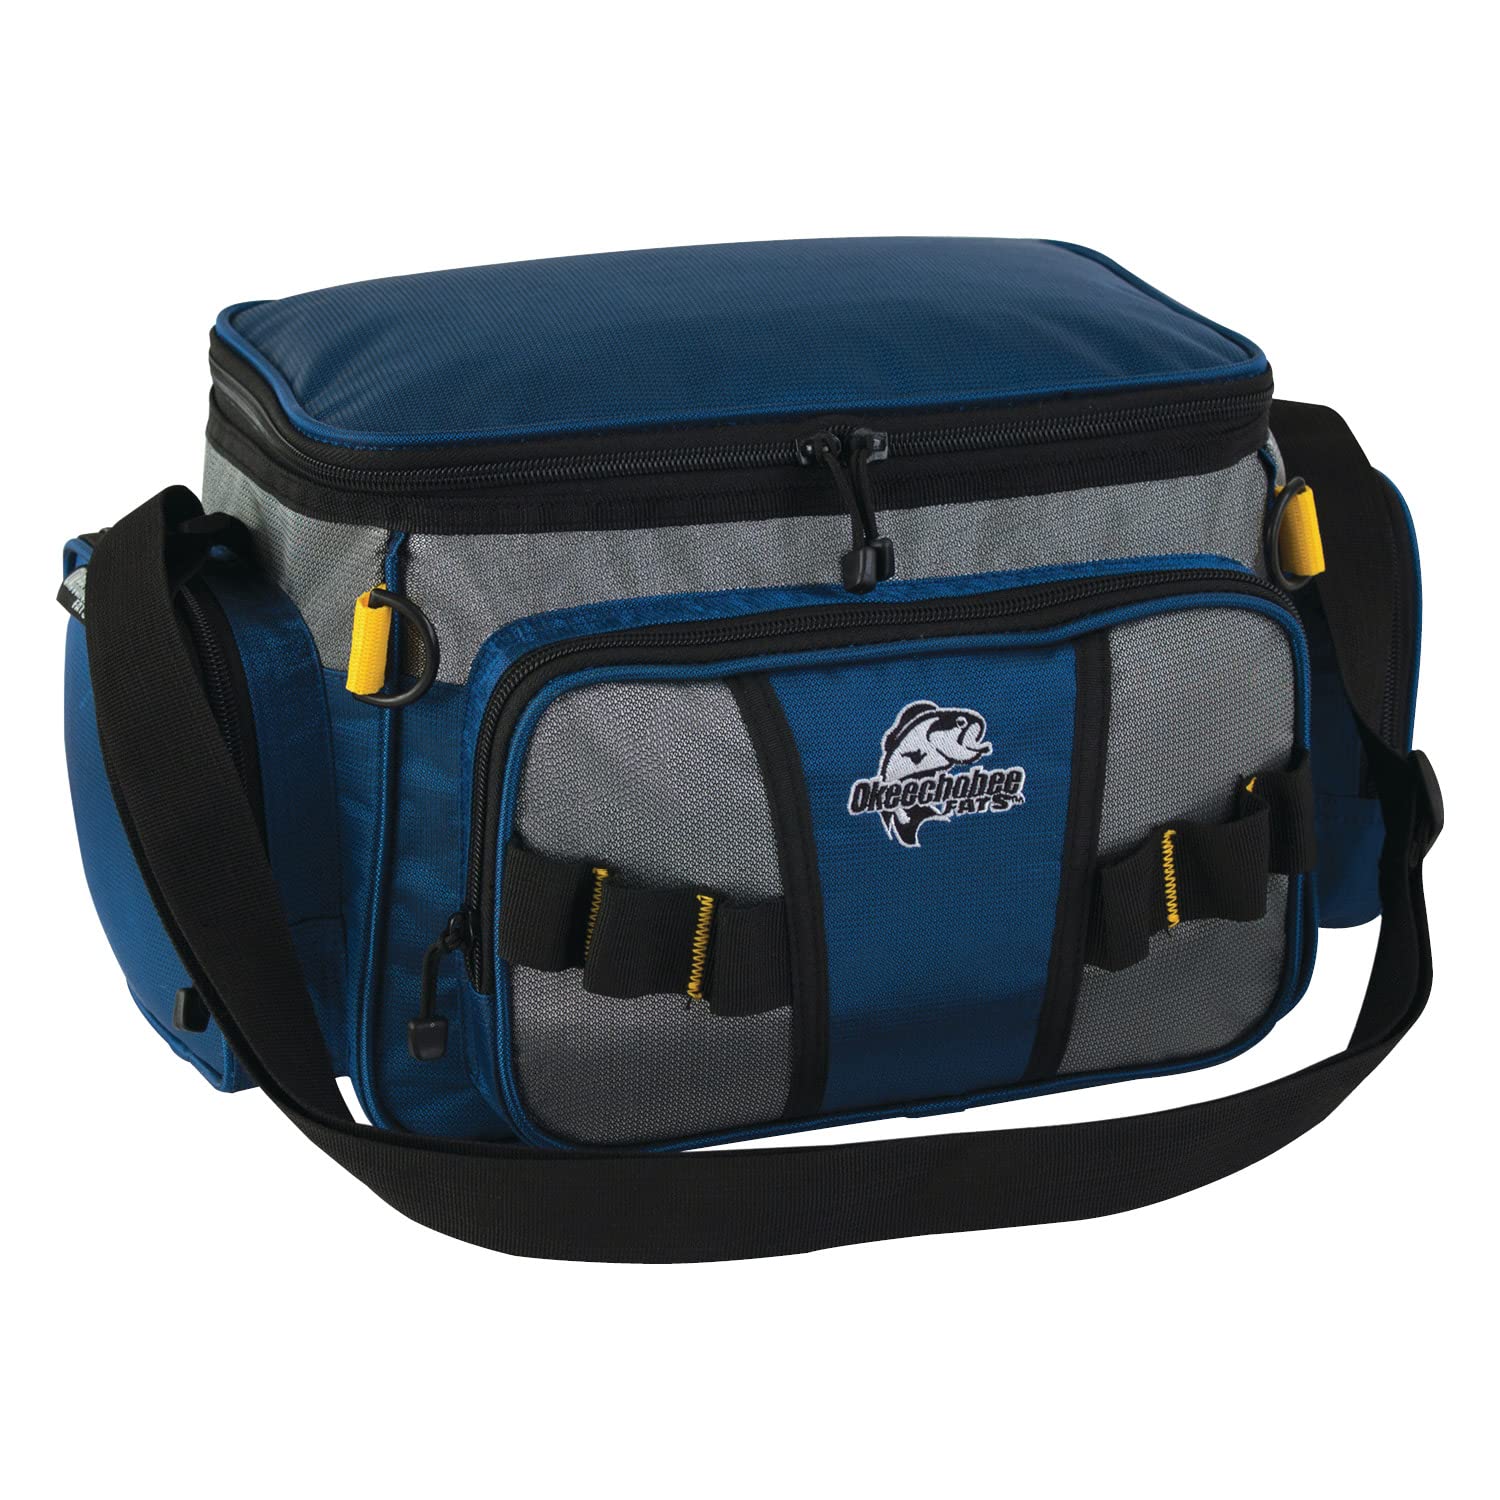 360 Fishing Gear Tackle Bag by Okeechobee Fats Soft Sided Fishing Bag Includes 3 Fishing Accessories Utility Boxes Top